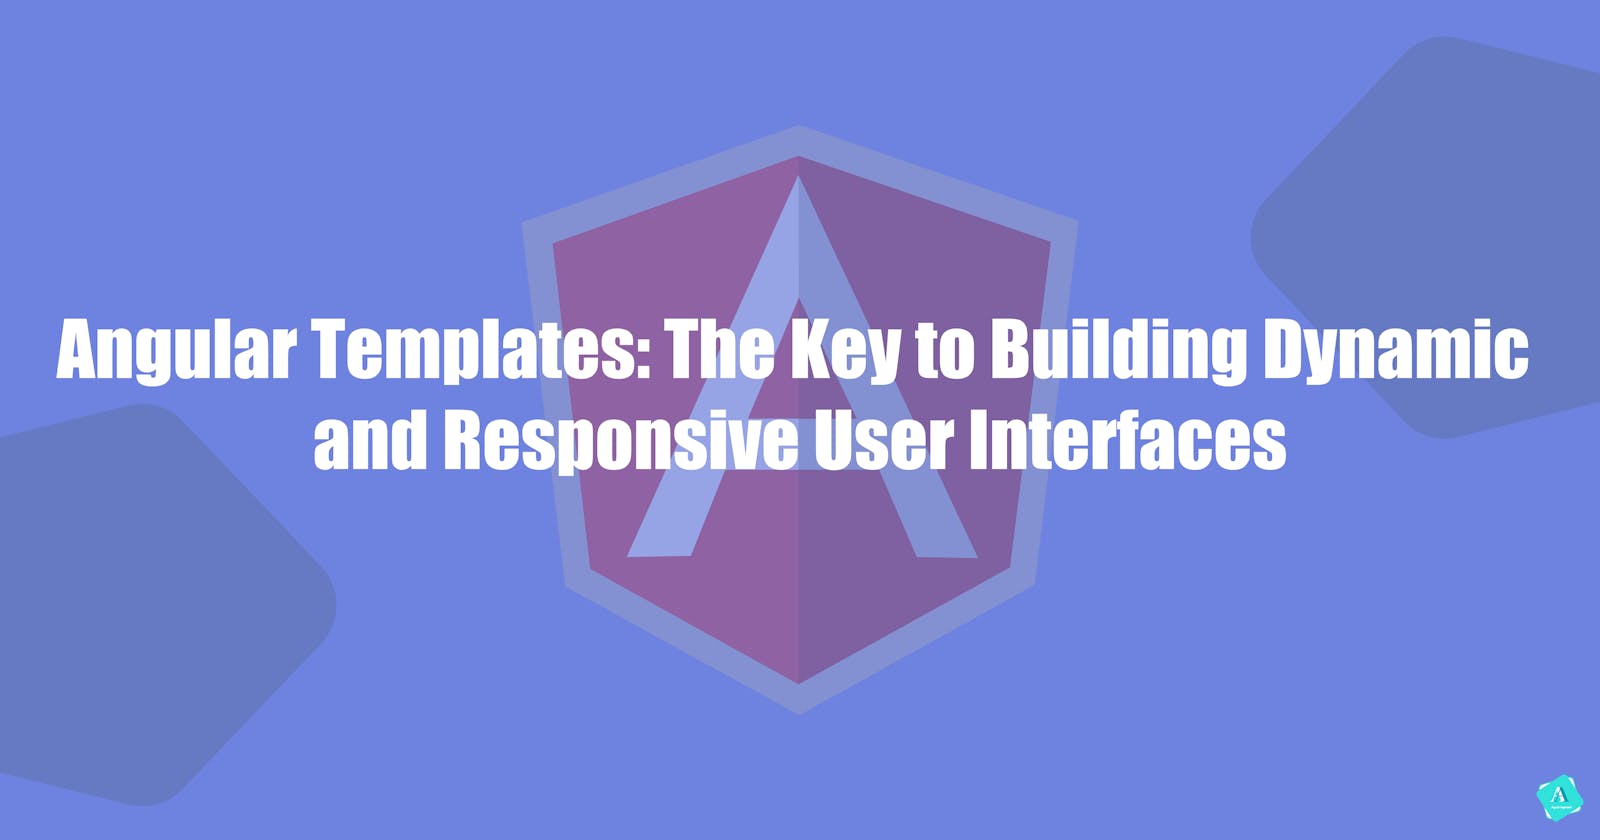 Angular Templates: The Key to Building Dynamic and Responsive User Interfaces